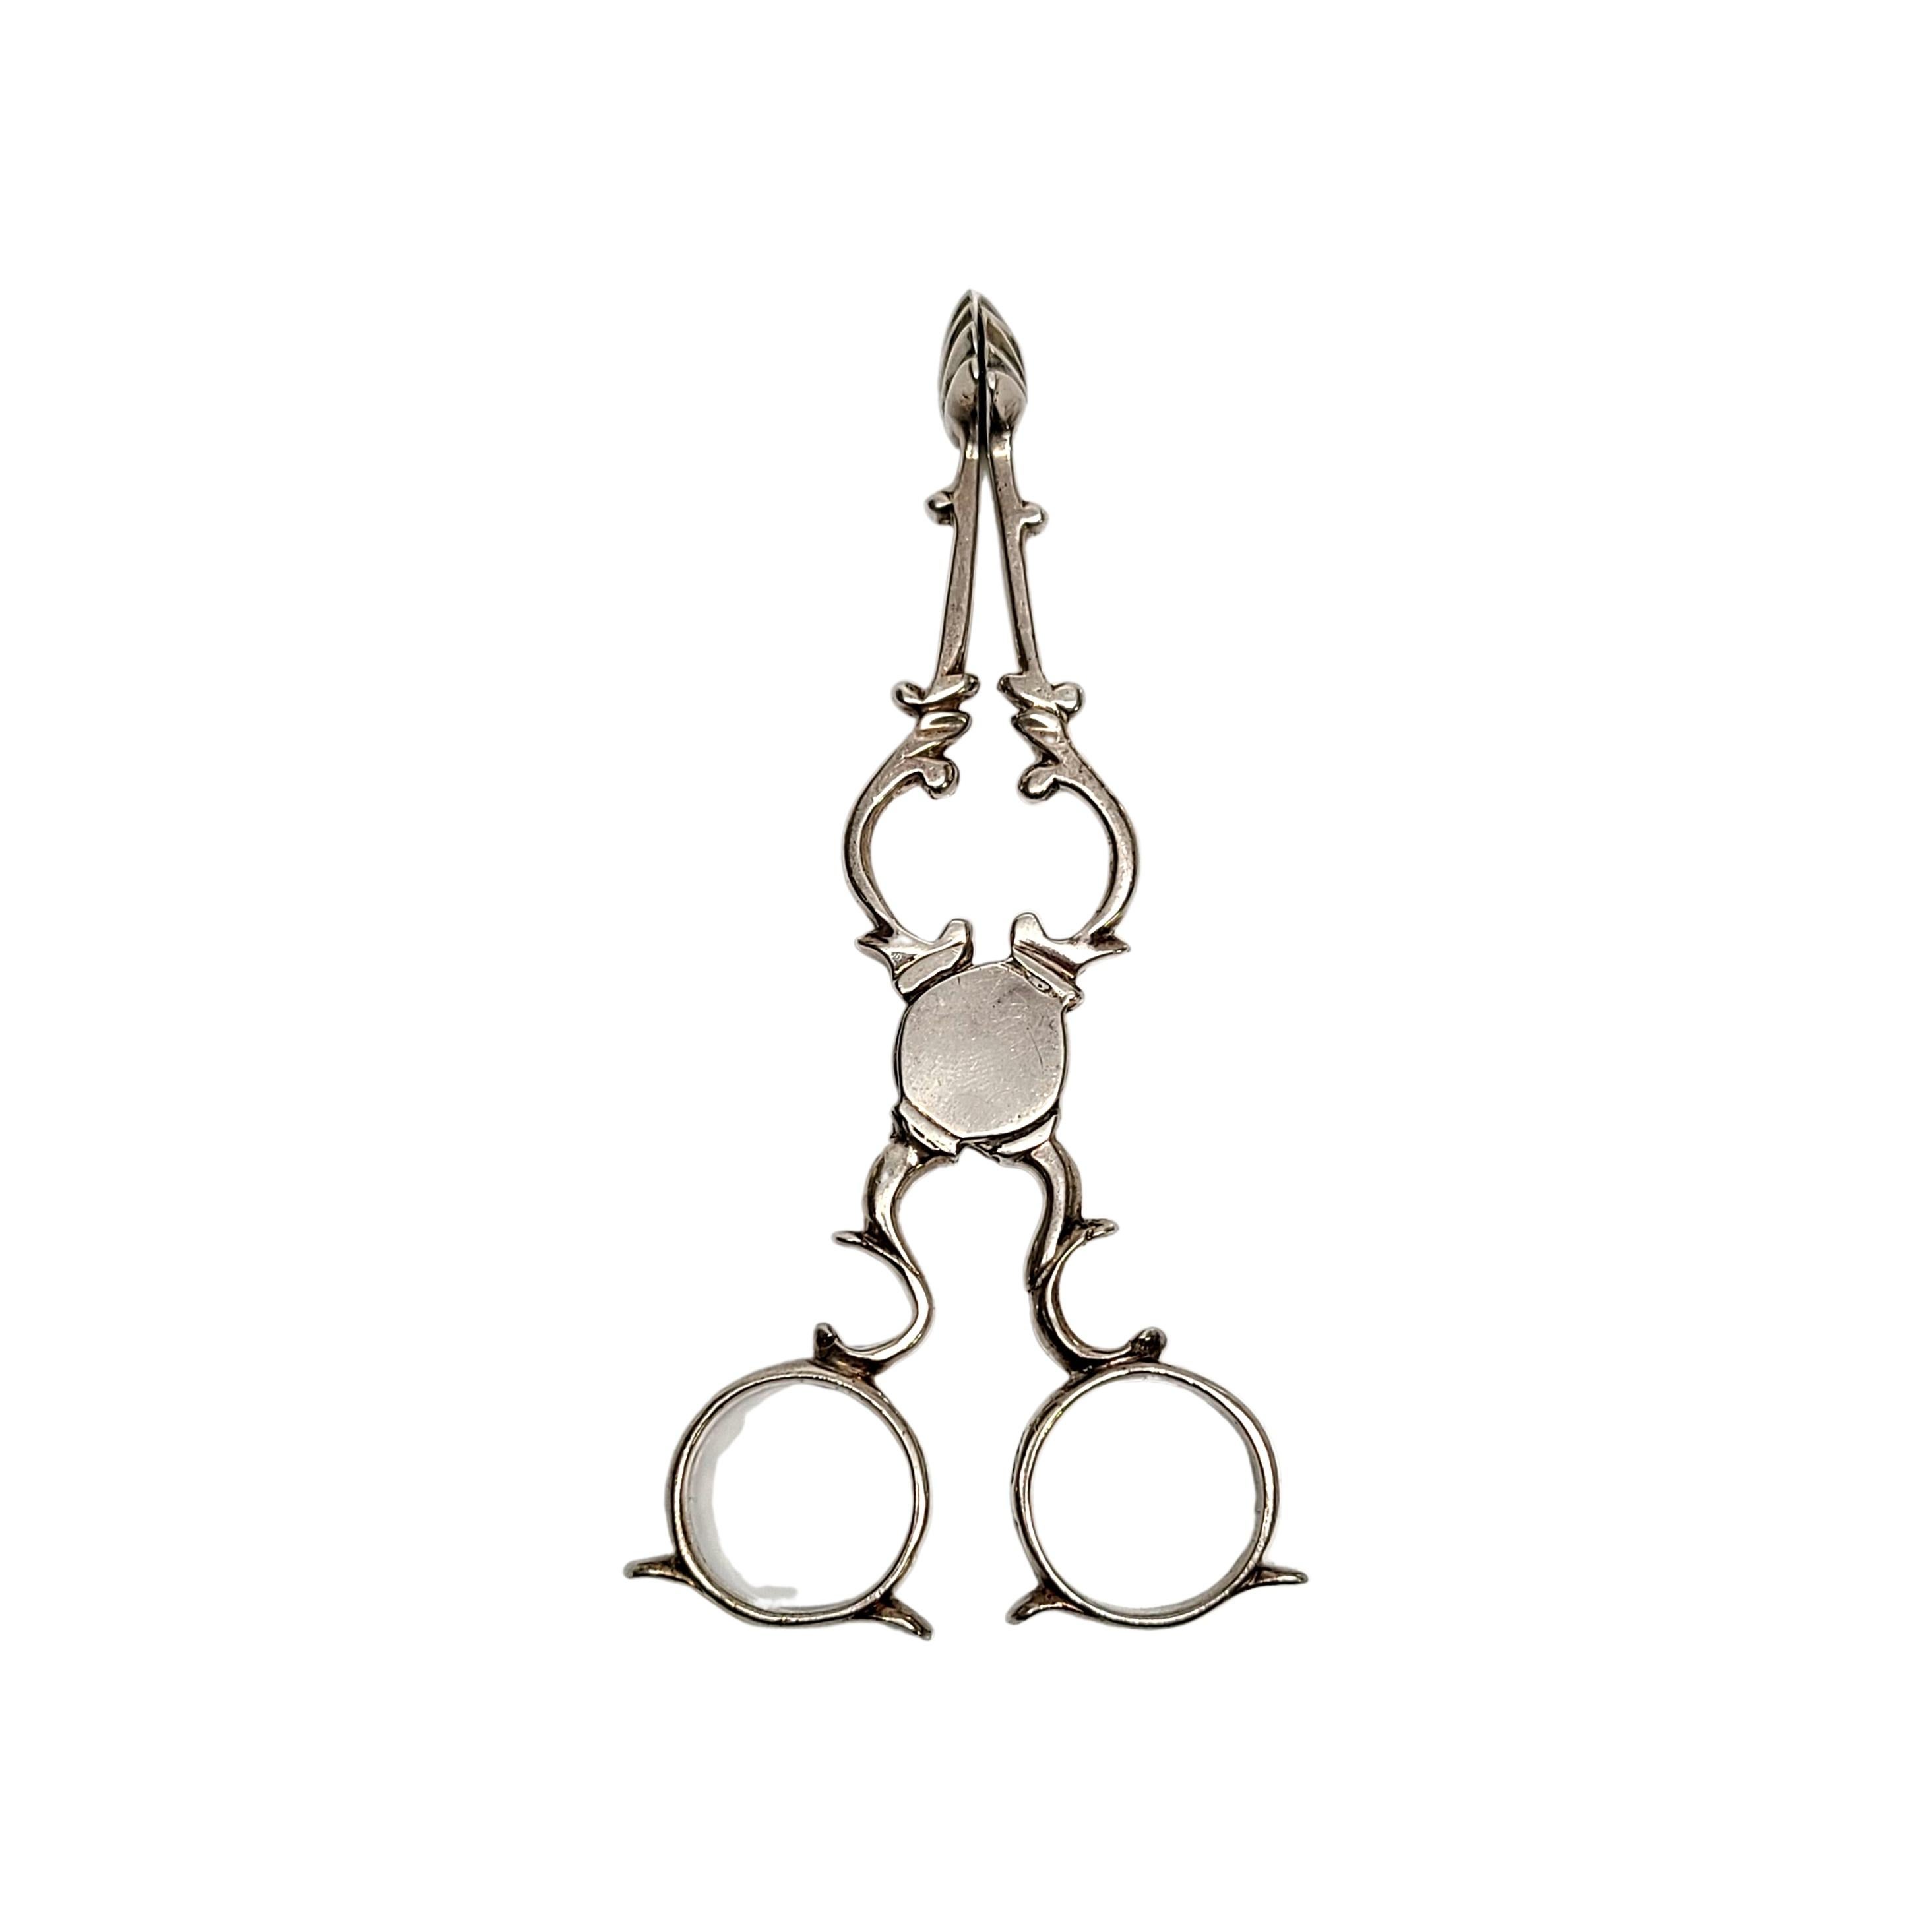 Georgian Era sterling silver Tea Tongs or Sugar Nips.

The scissor shaped Tea Tongs/Sugar Nips were used from circa 1720-1770. 18th Century nips were typically marked on the finger rings with the maker's mark and the lion passant, as these are.